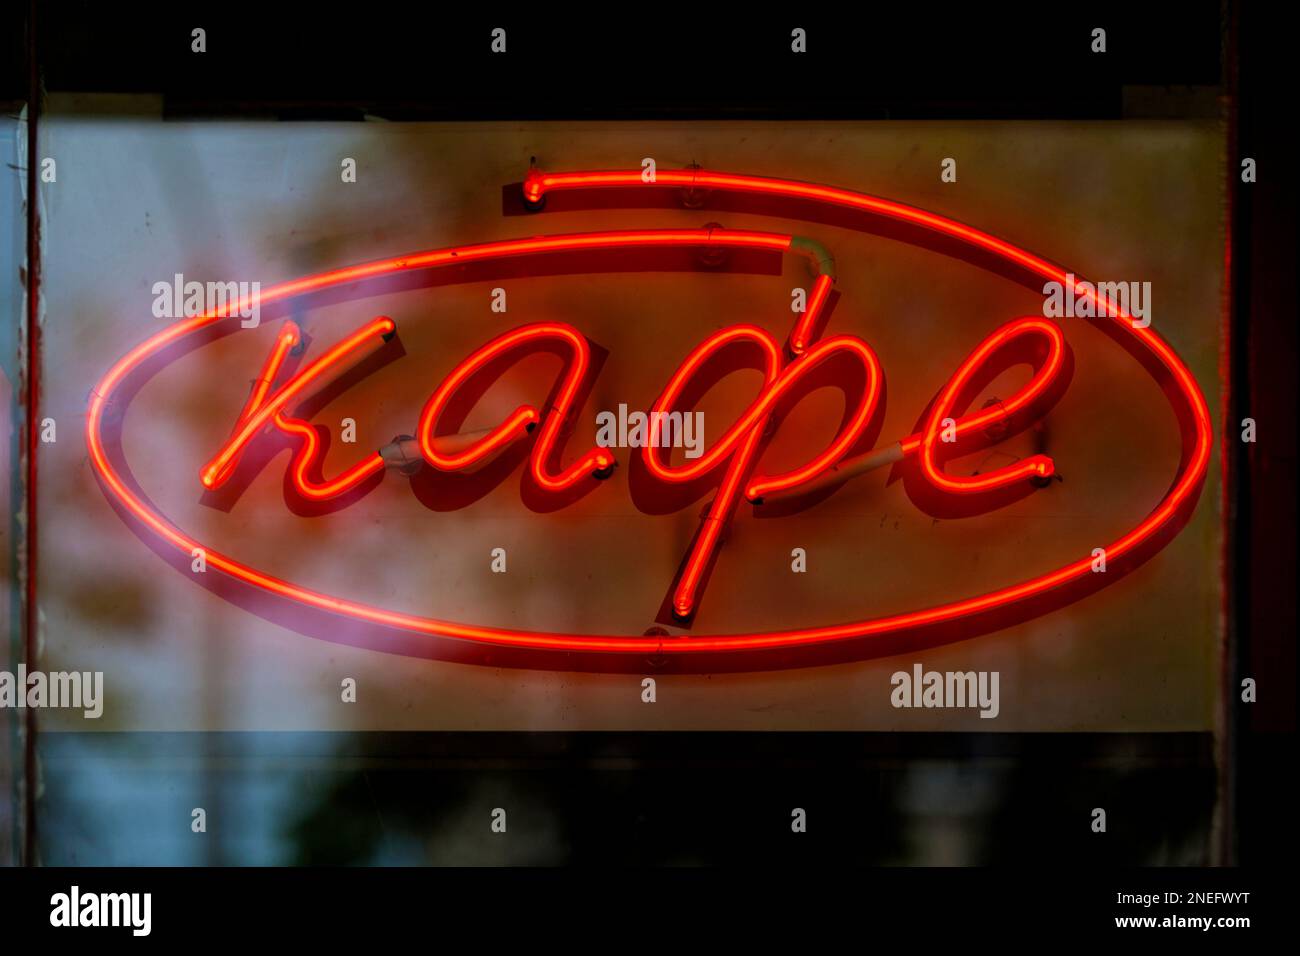 Evakuering Signal Fearless Close-up on a red neon light shaped into the Russian word "Kaфe", meaning  in English "Cafe Stock Photo - Alamy